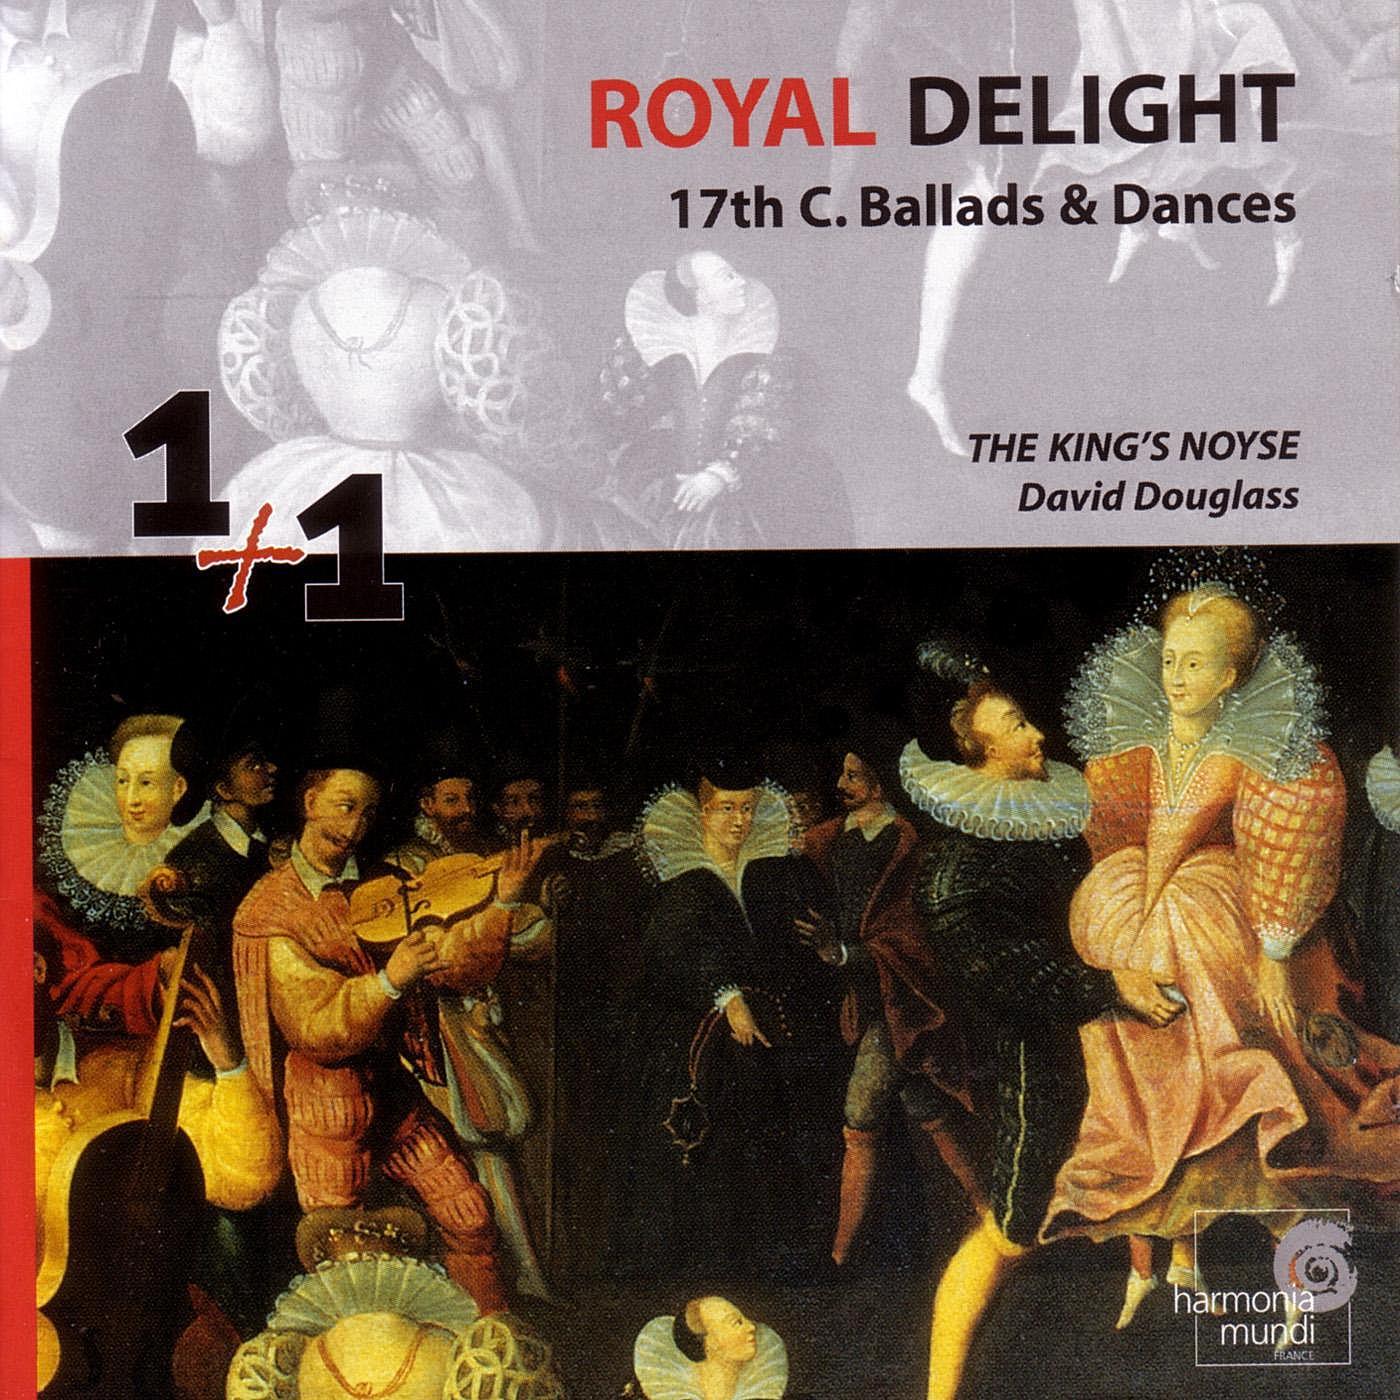 Blew-cap for me (from "The King's Delight - 17th century ballads for voice & violin band")